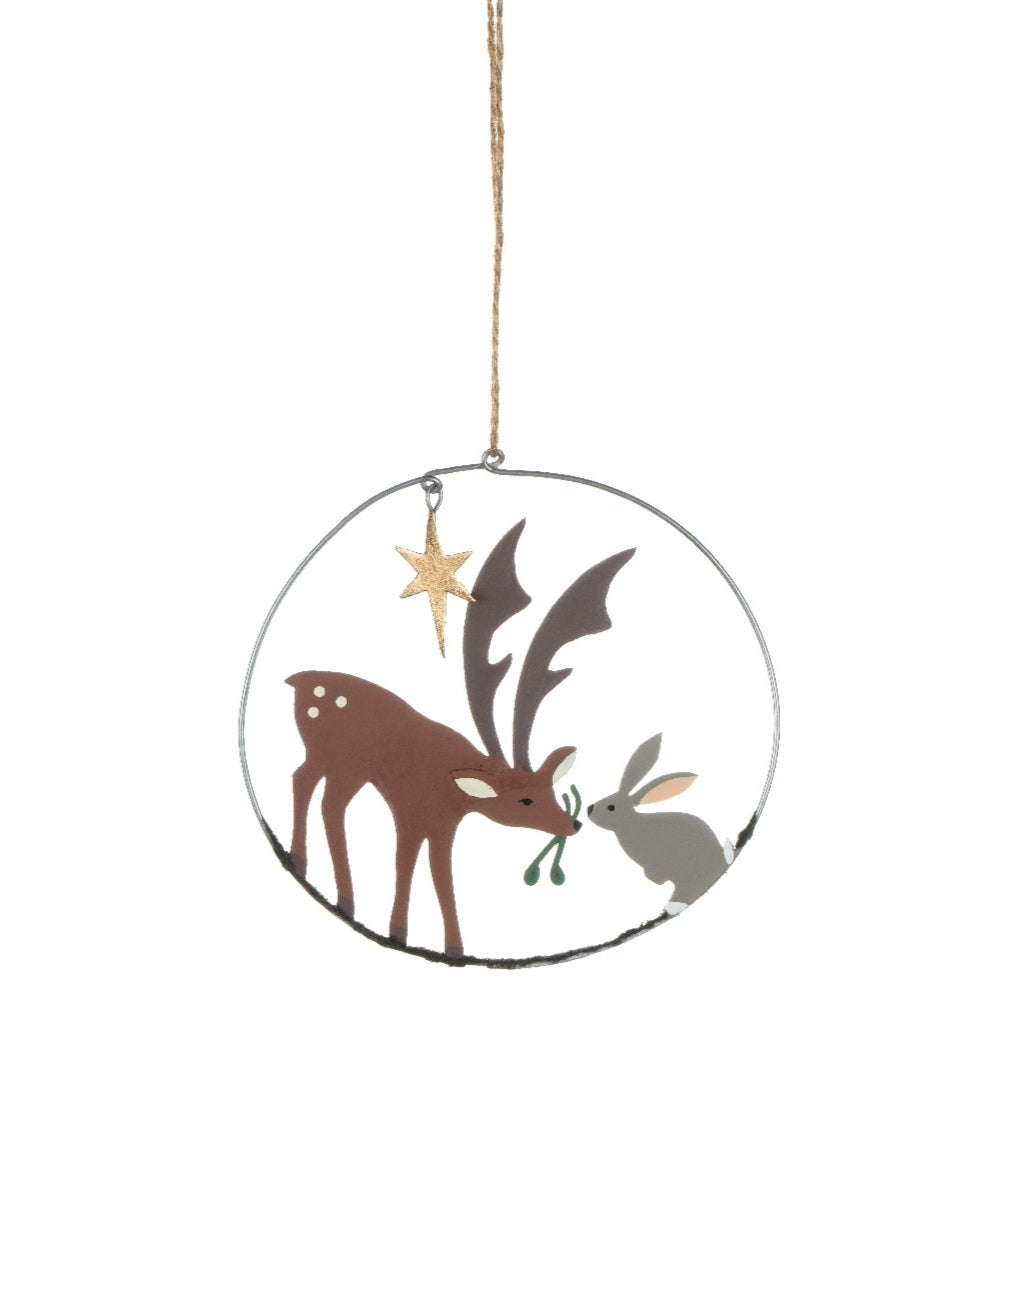 Shoeless Joe - Hare and Deer in ring - hanging Christmas Tree decoration